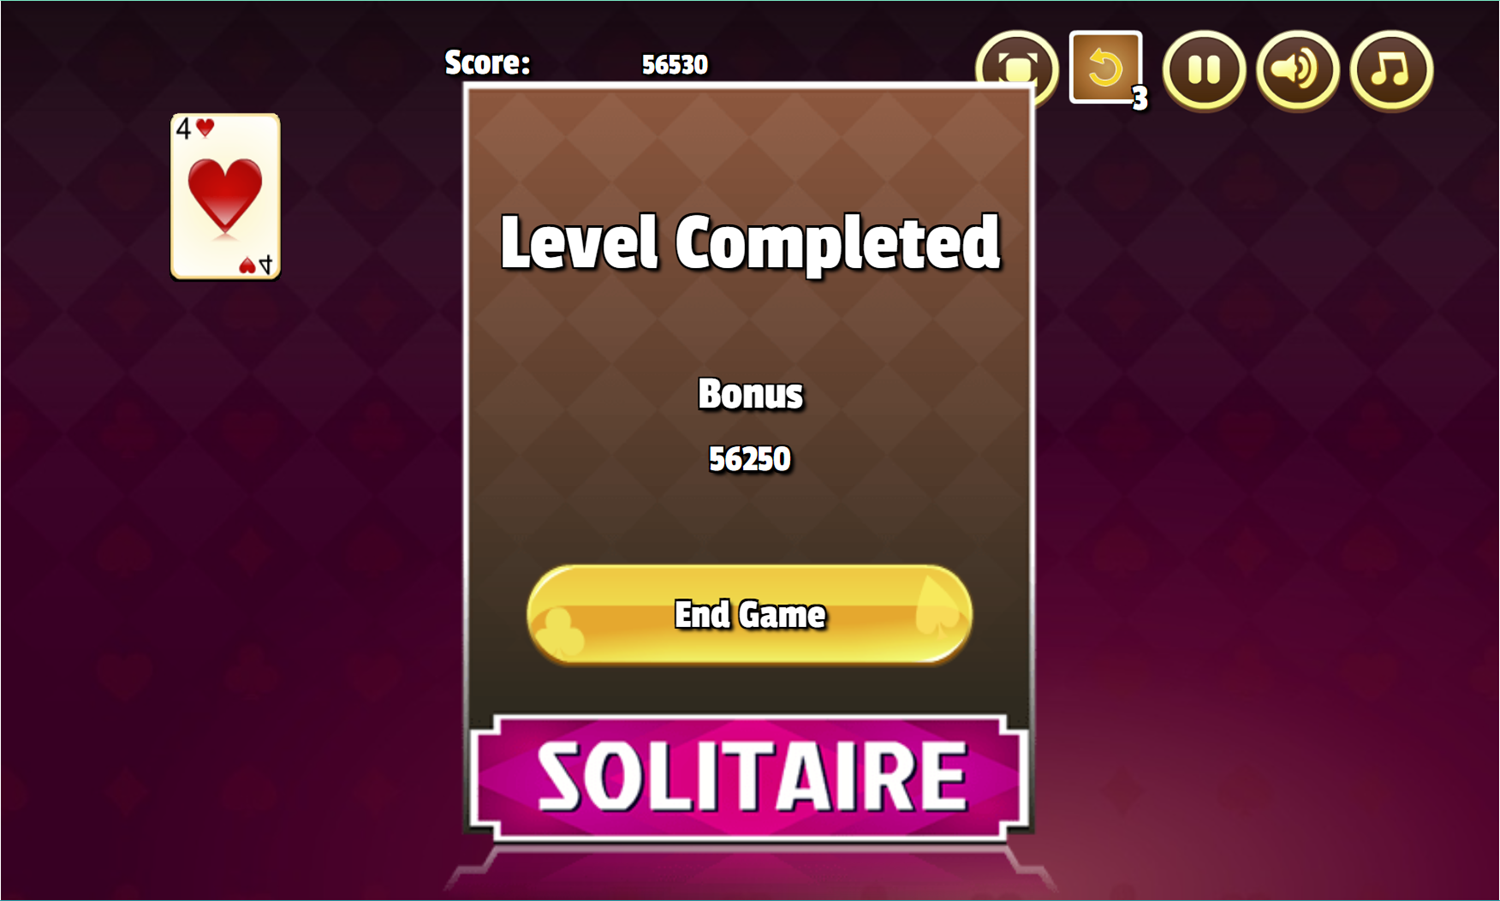 Tower Solitaire Game Level Completed Screen Screenshot.